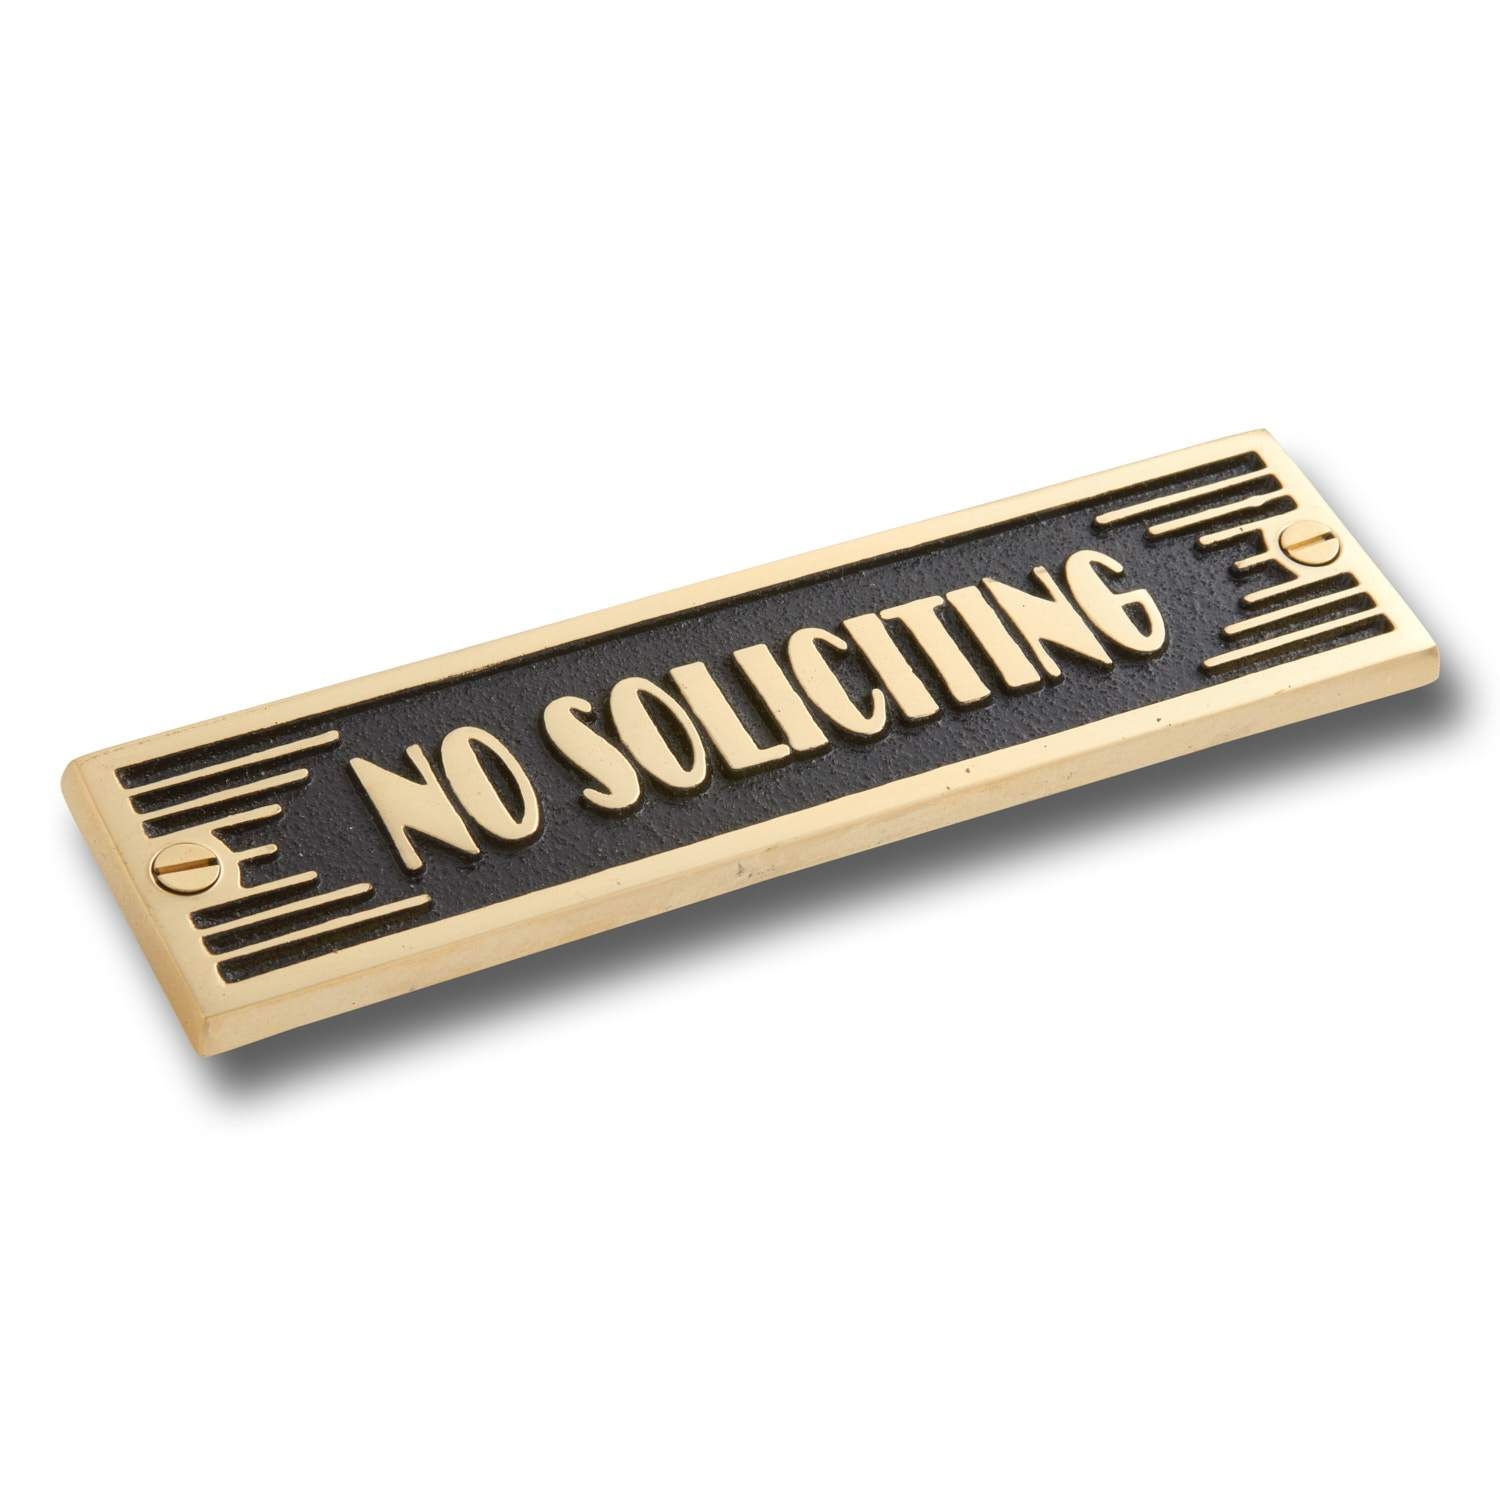 No Soliciting Metal Door Sign.  Art Deco Style Home Décor Wall Plaque Accessories – No Soliciting Brass